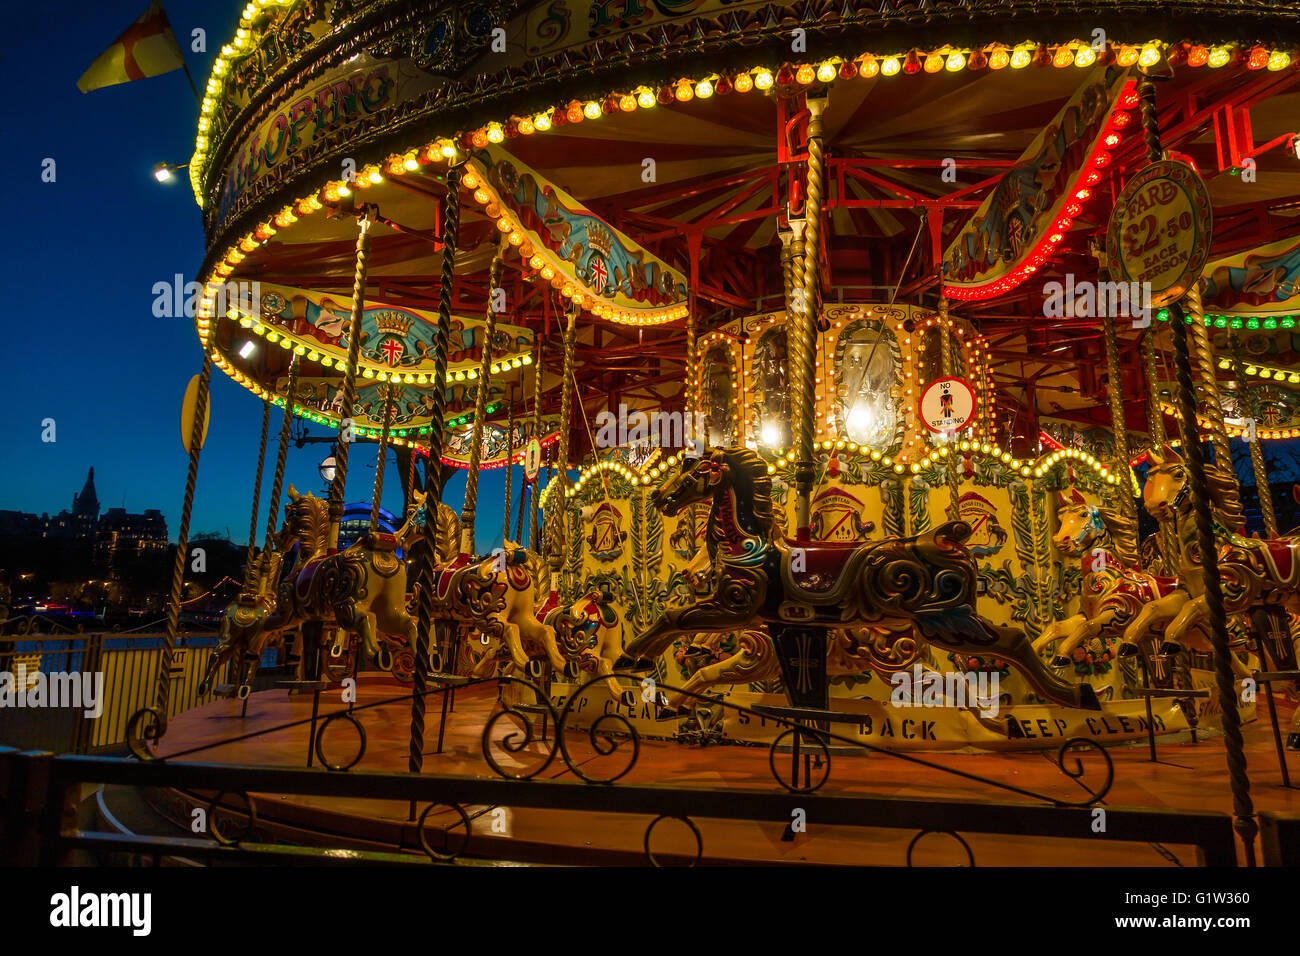 Fairground Carousel London South Bank Angleterre Nuit Banque D'Images